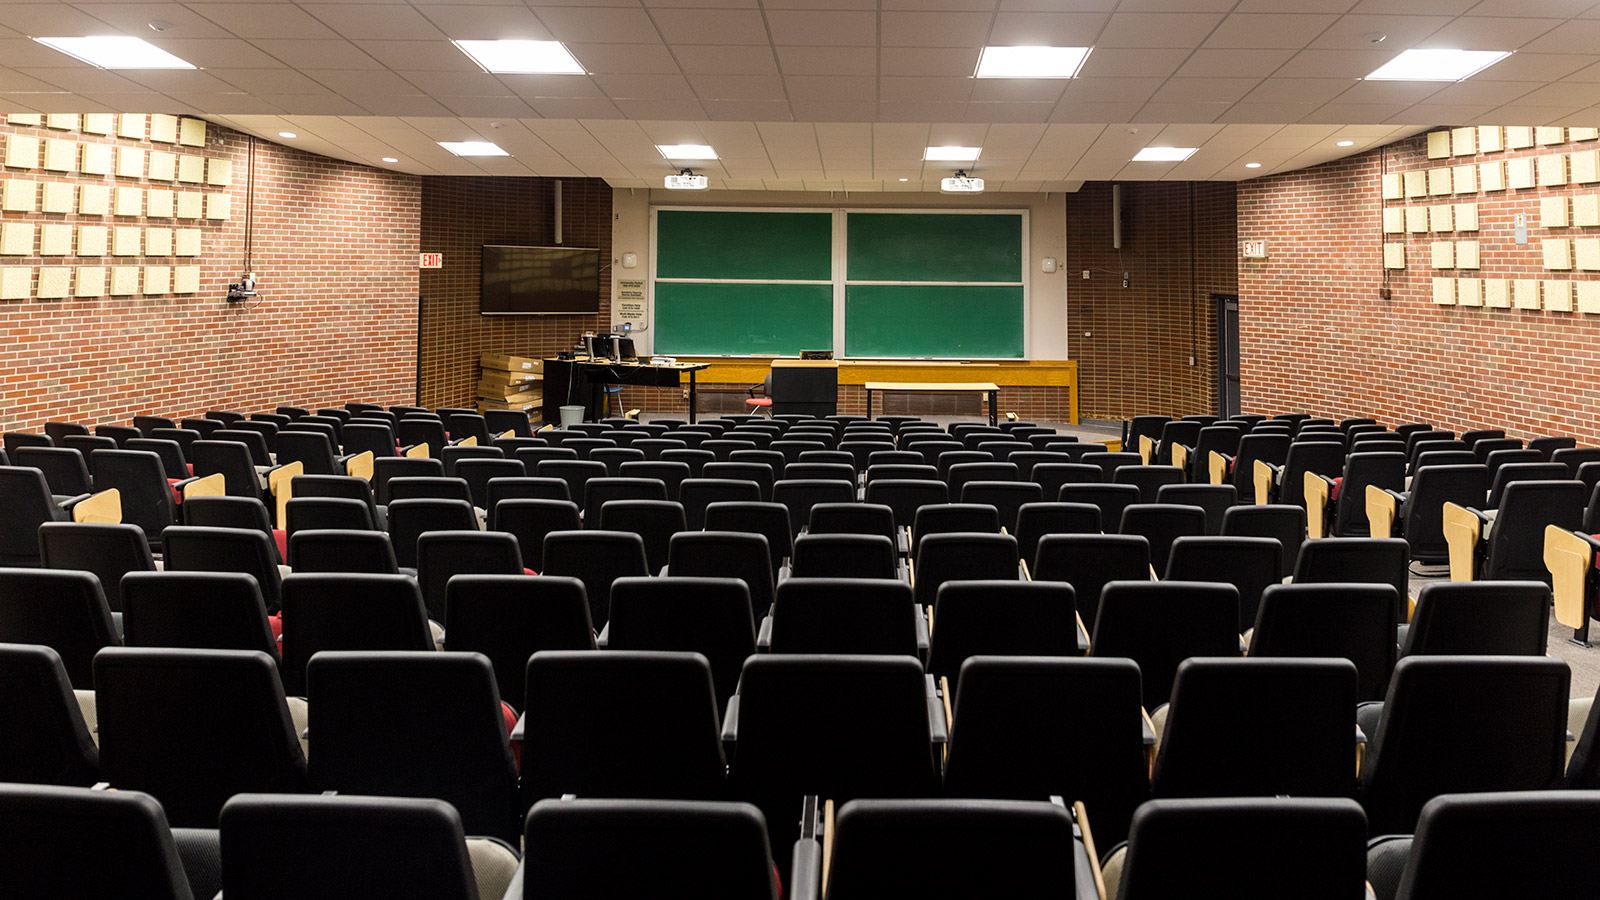 Henzlik Lecture Halls ample space and chalk boards.